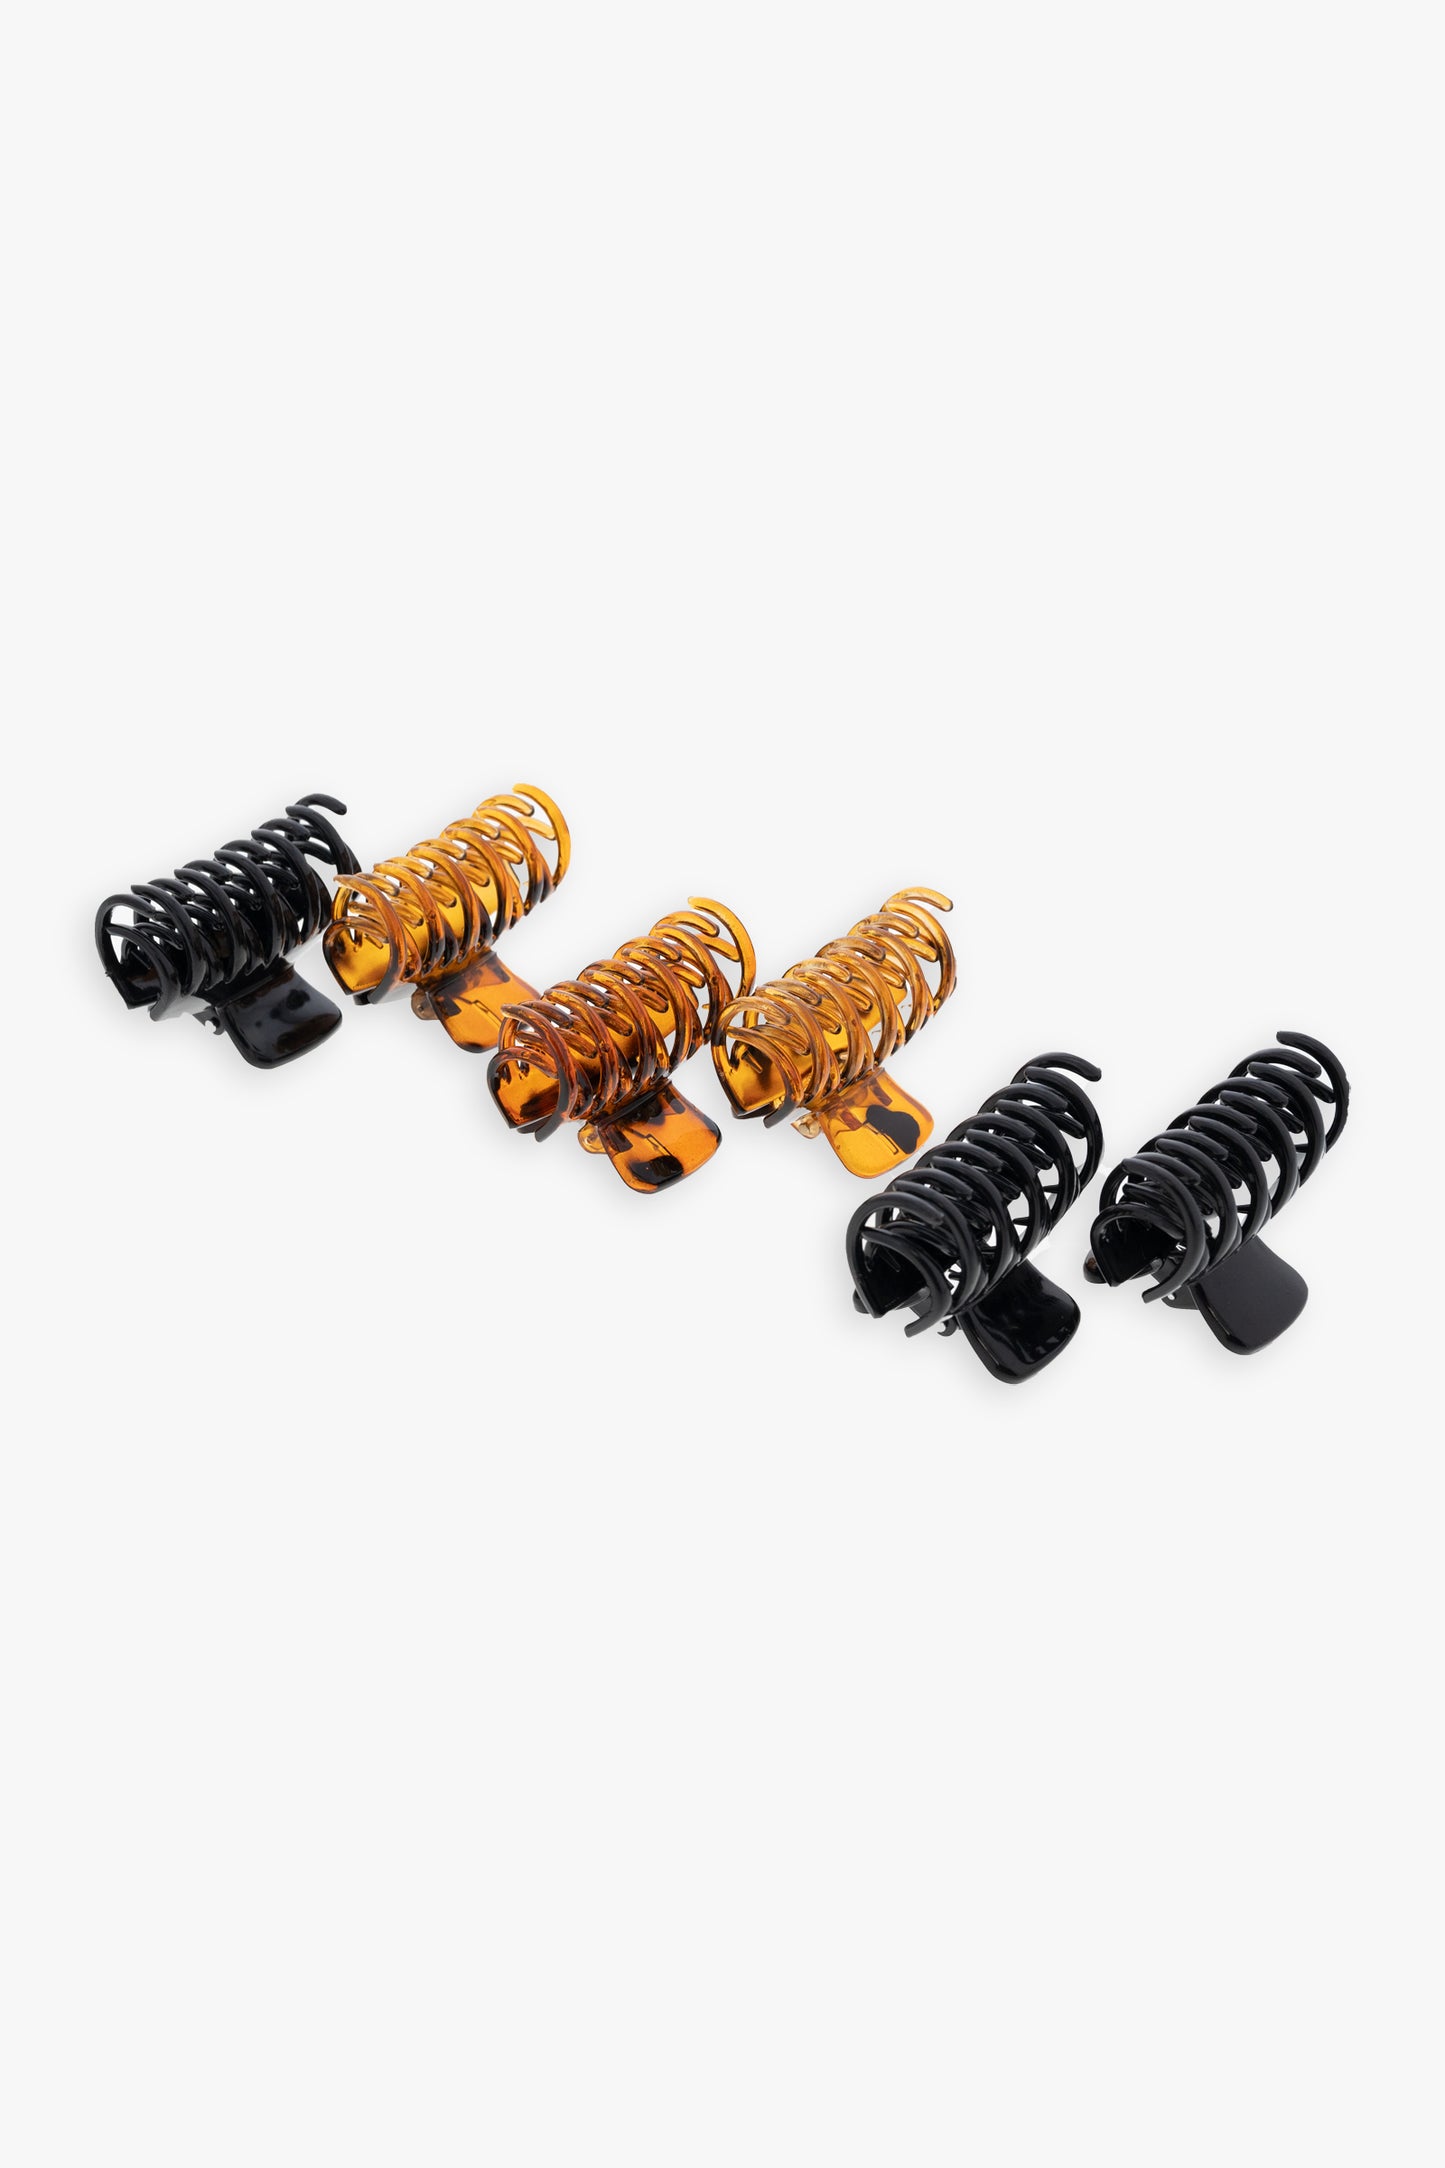 Hold Tight Double Teeth Claw Clips in Black and Tortoise Shell